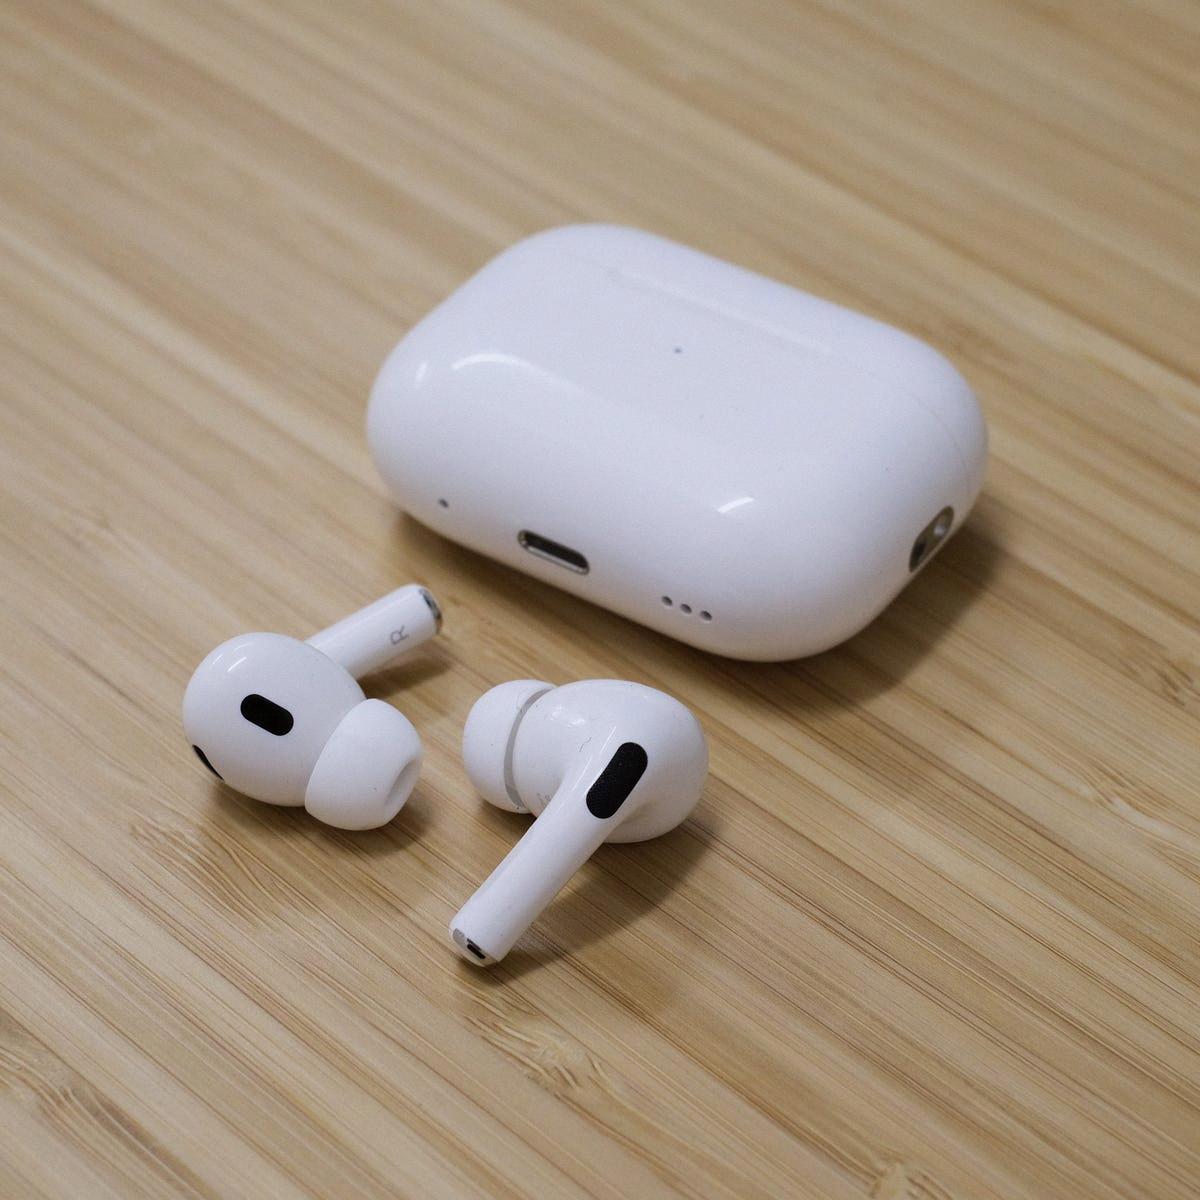 how to connect replacement airpod